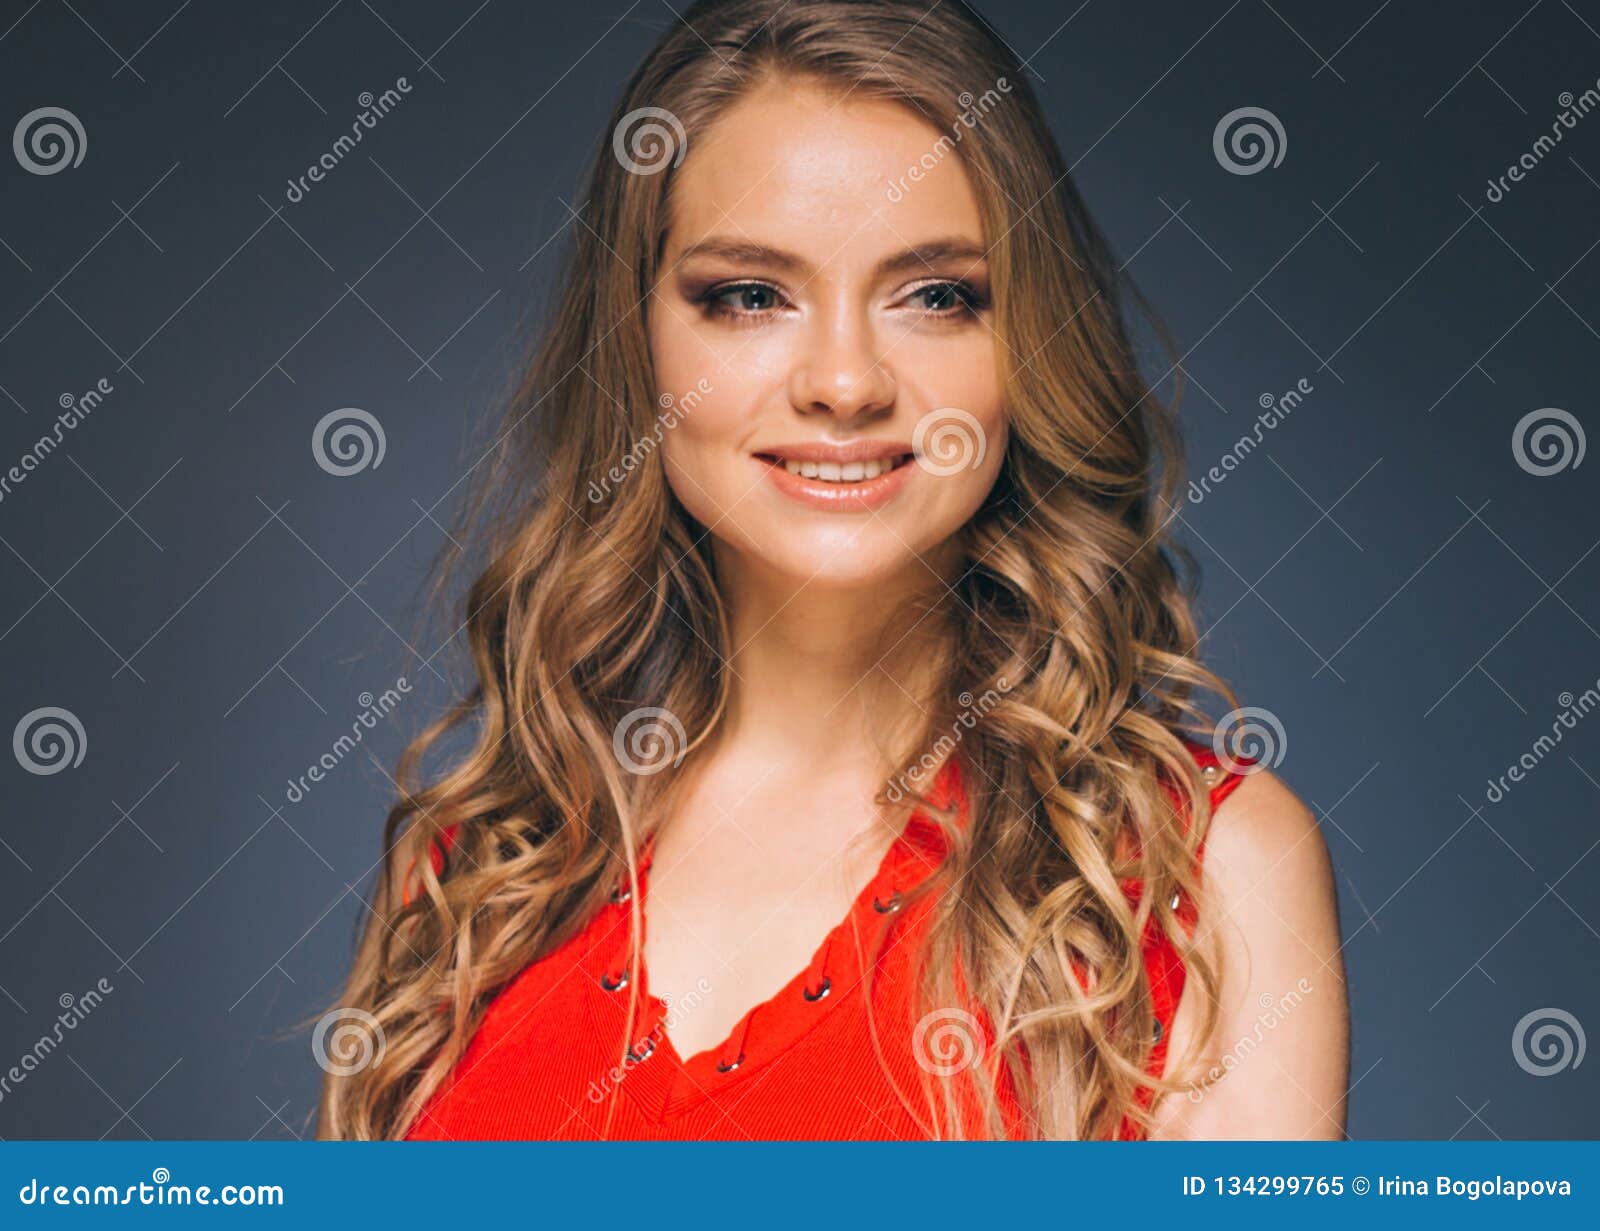 Woman in Red Dress with Long Blonde Hair Stock Image - Image of looking ...